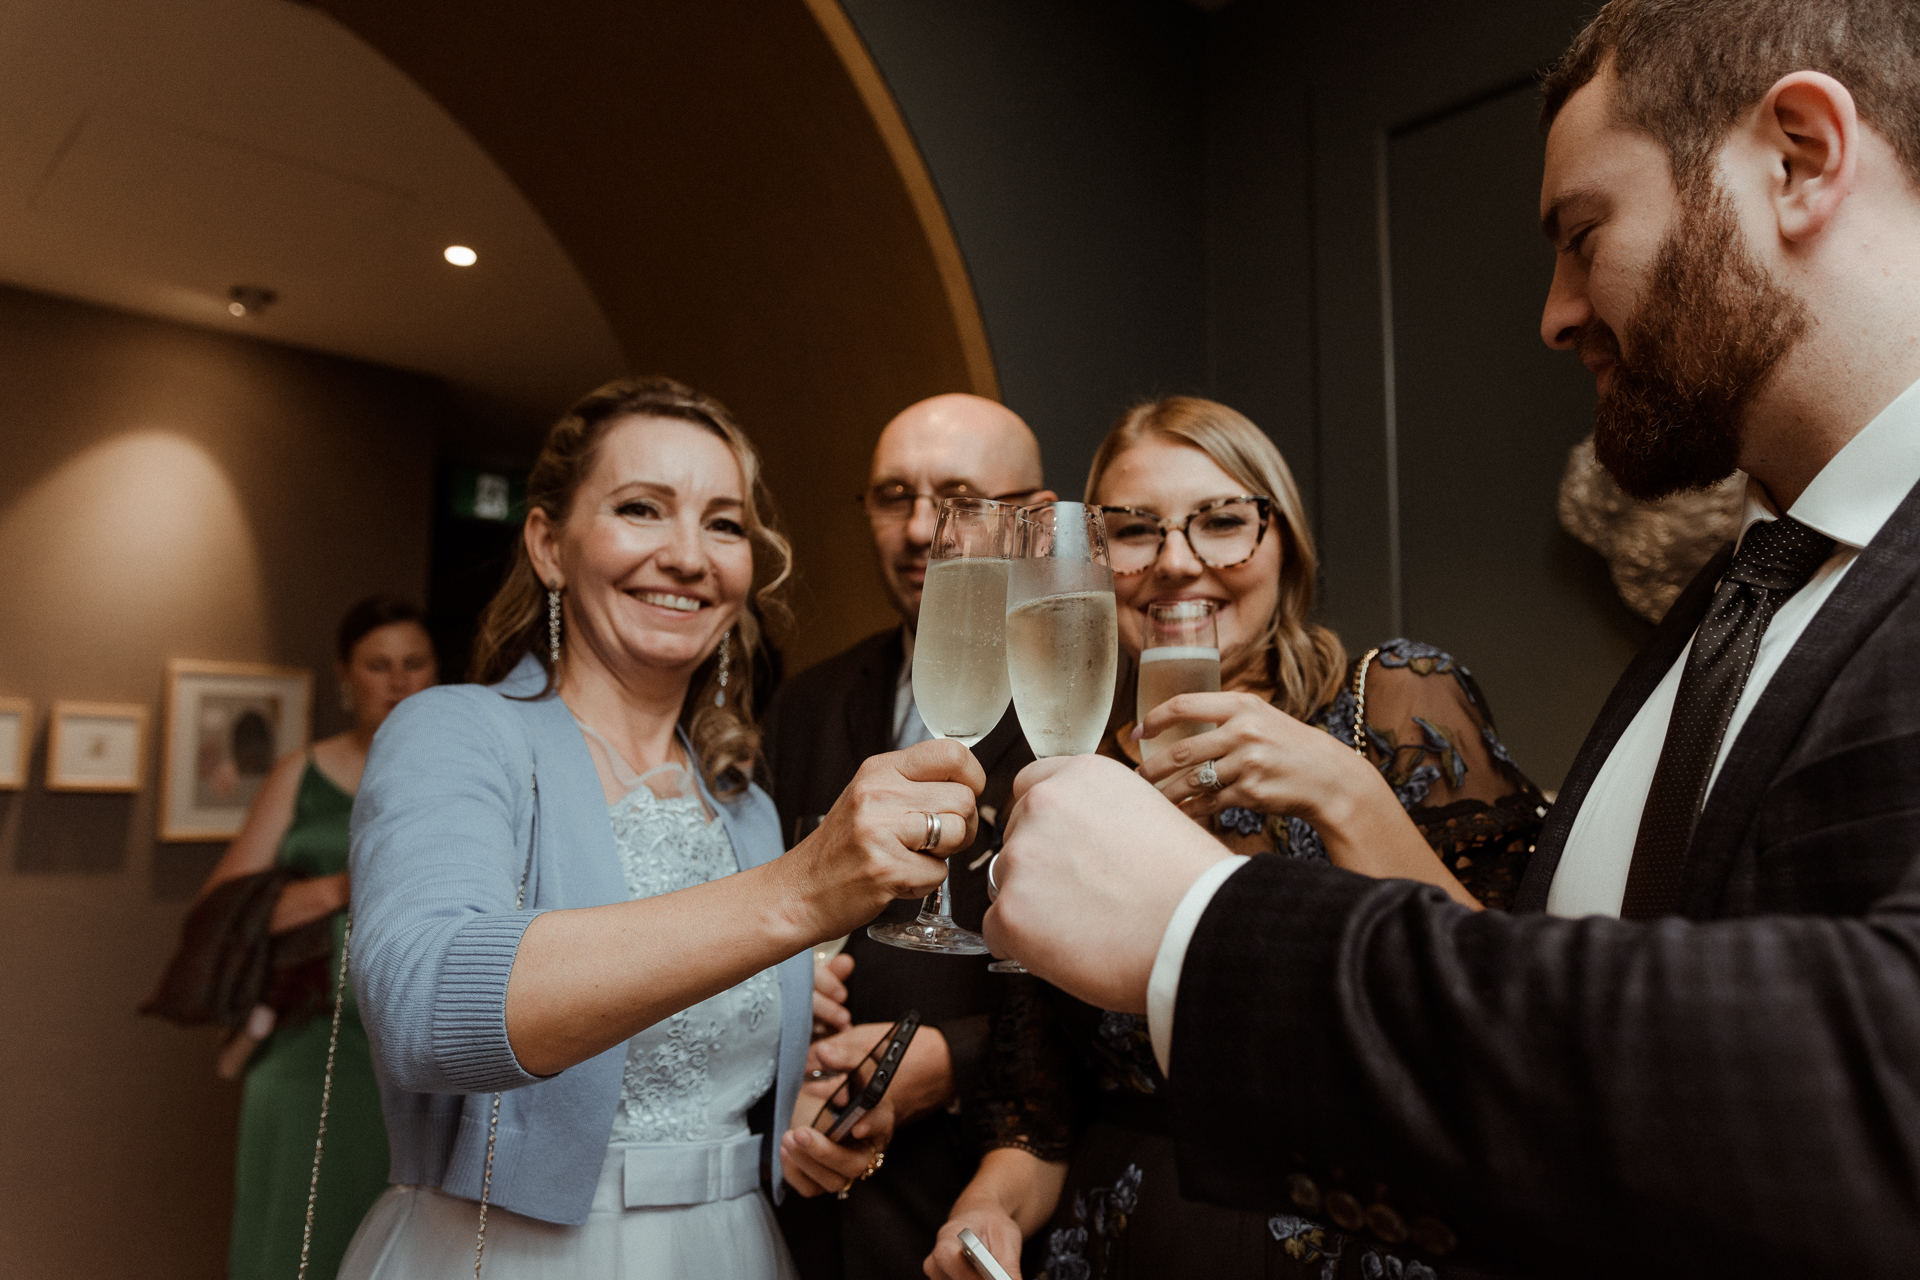 A group of people toasting with champagne glasses at a wedding